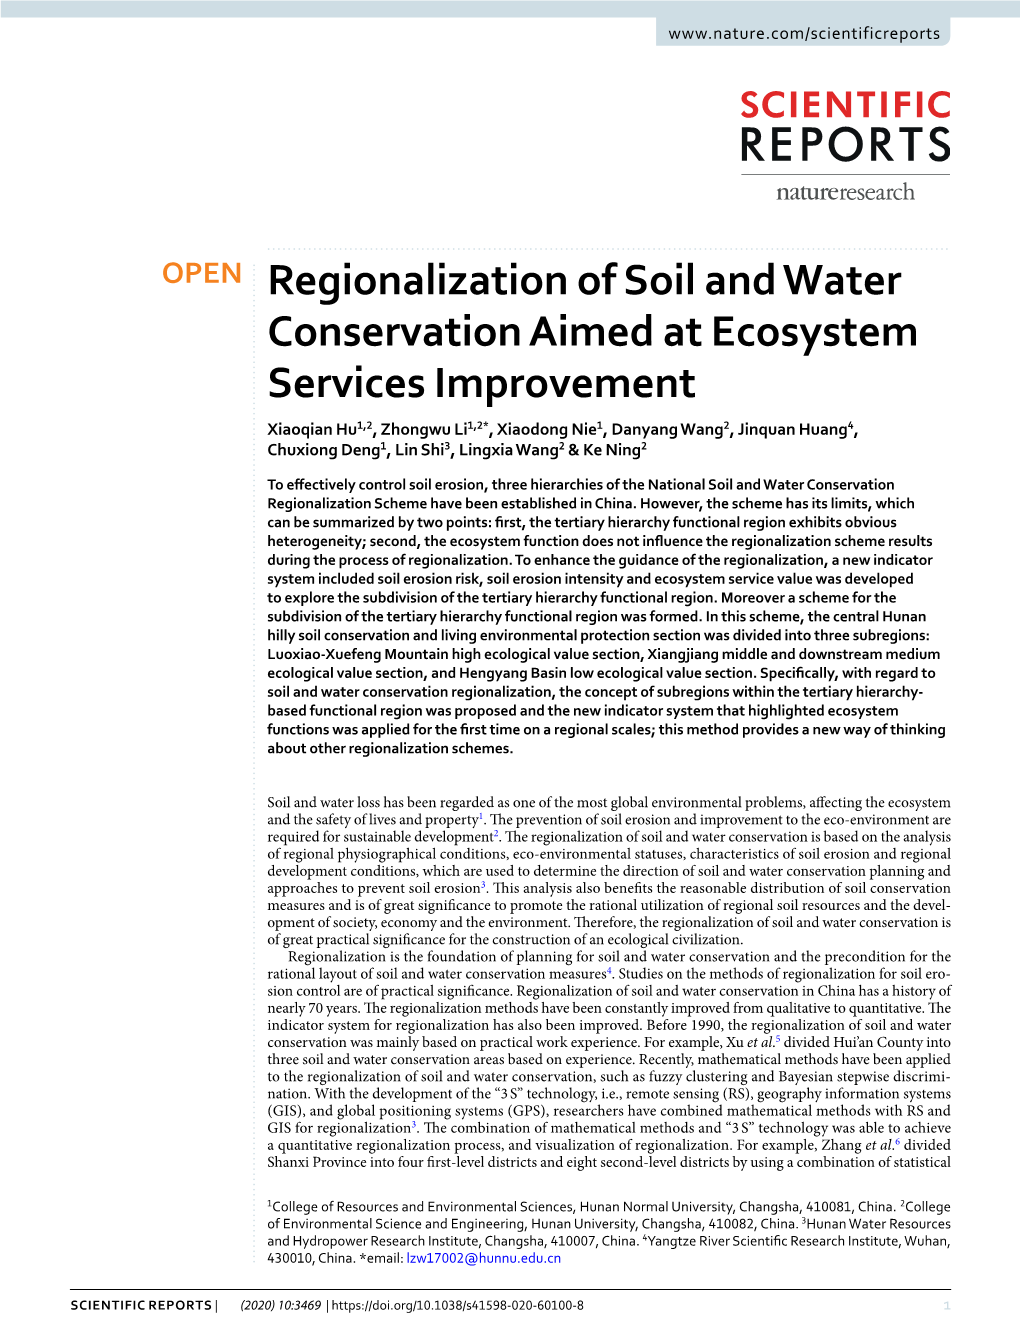 Regionalization of Soil and Water Conservation Aimed at Ecosystem